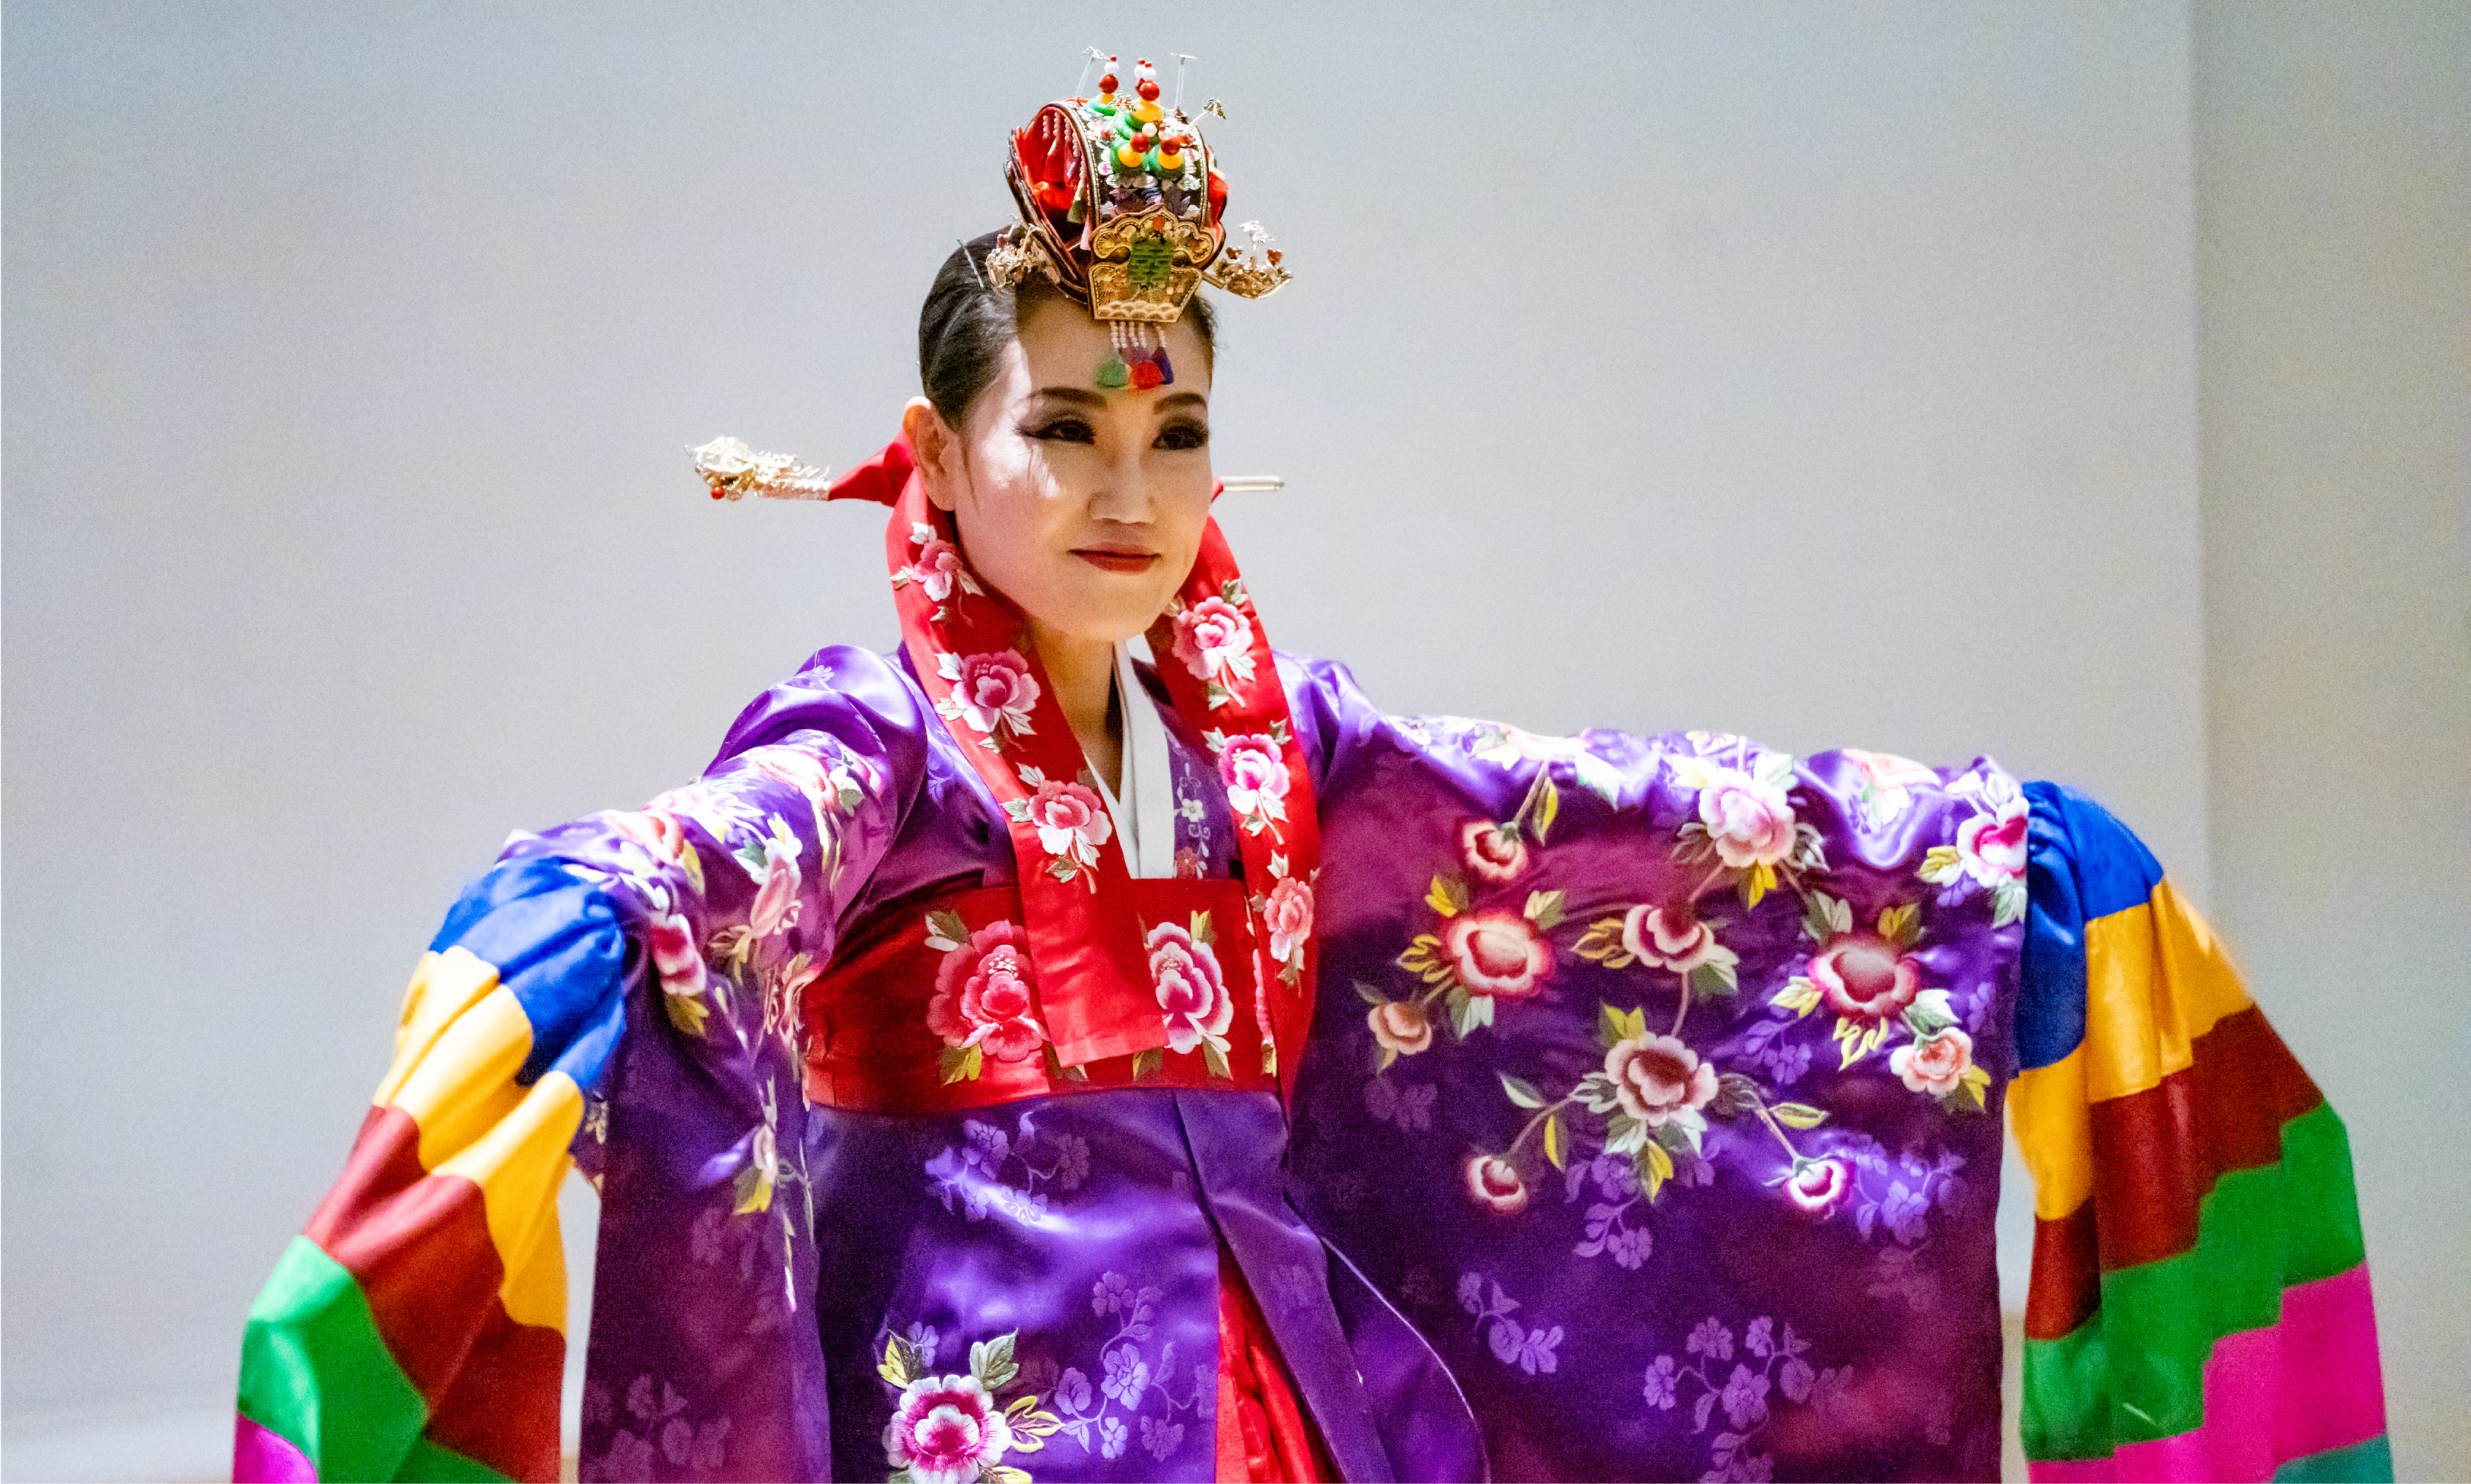 Kate Kim wears a brightly-colored hanbok and headdress while performing a traditional Korean prayer dance.